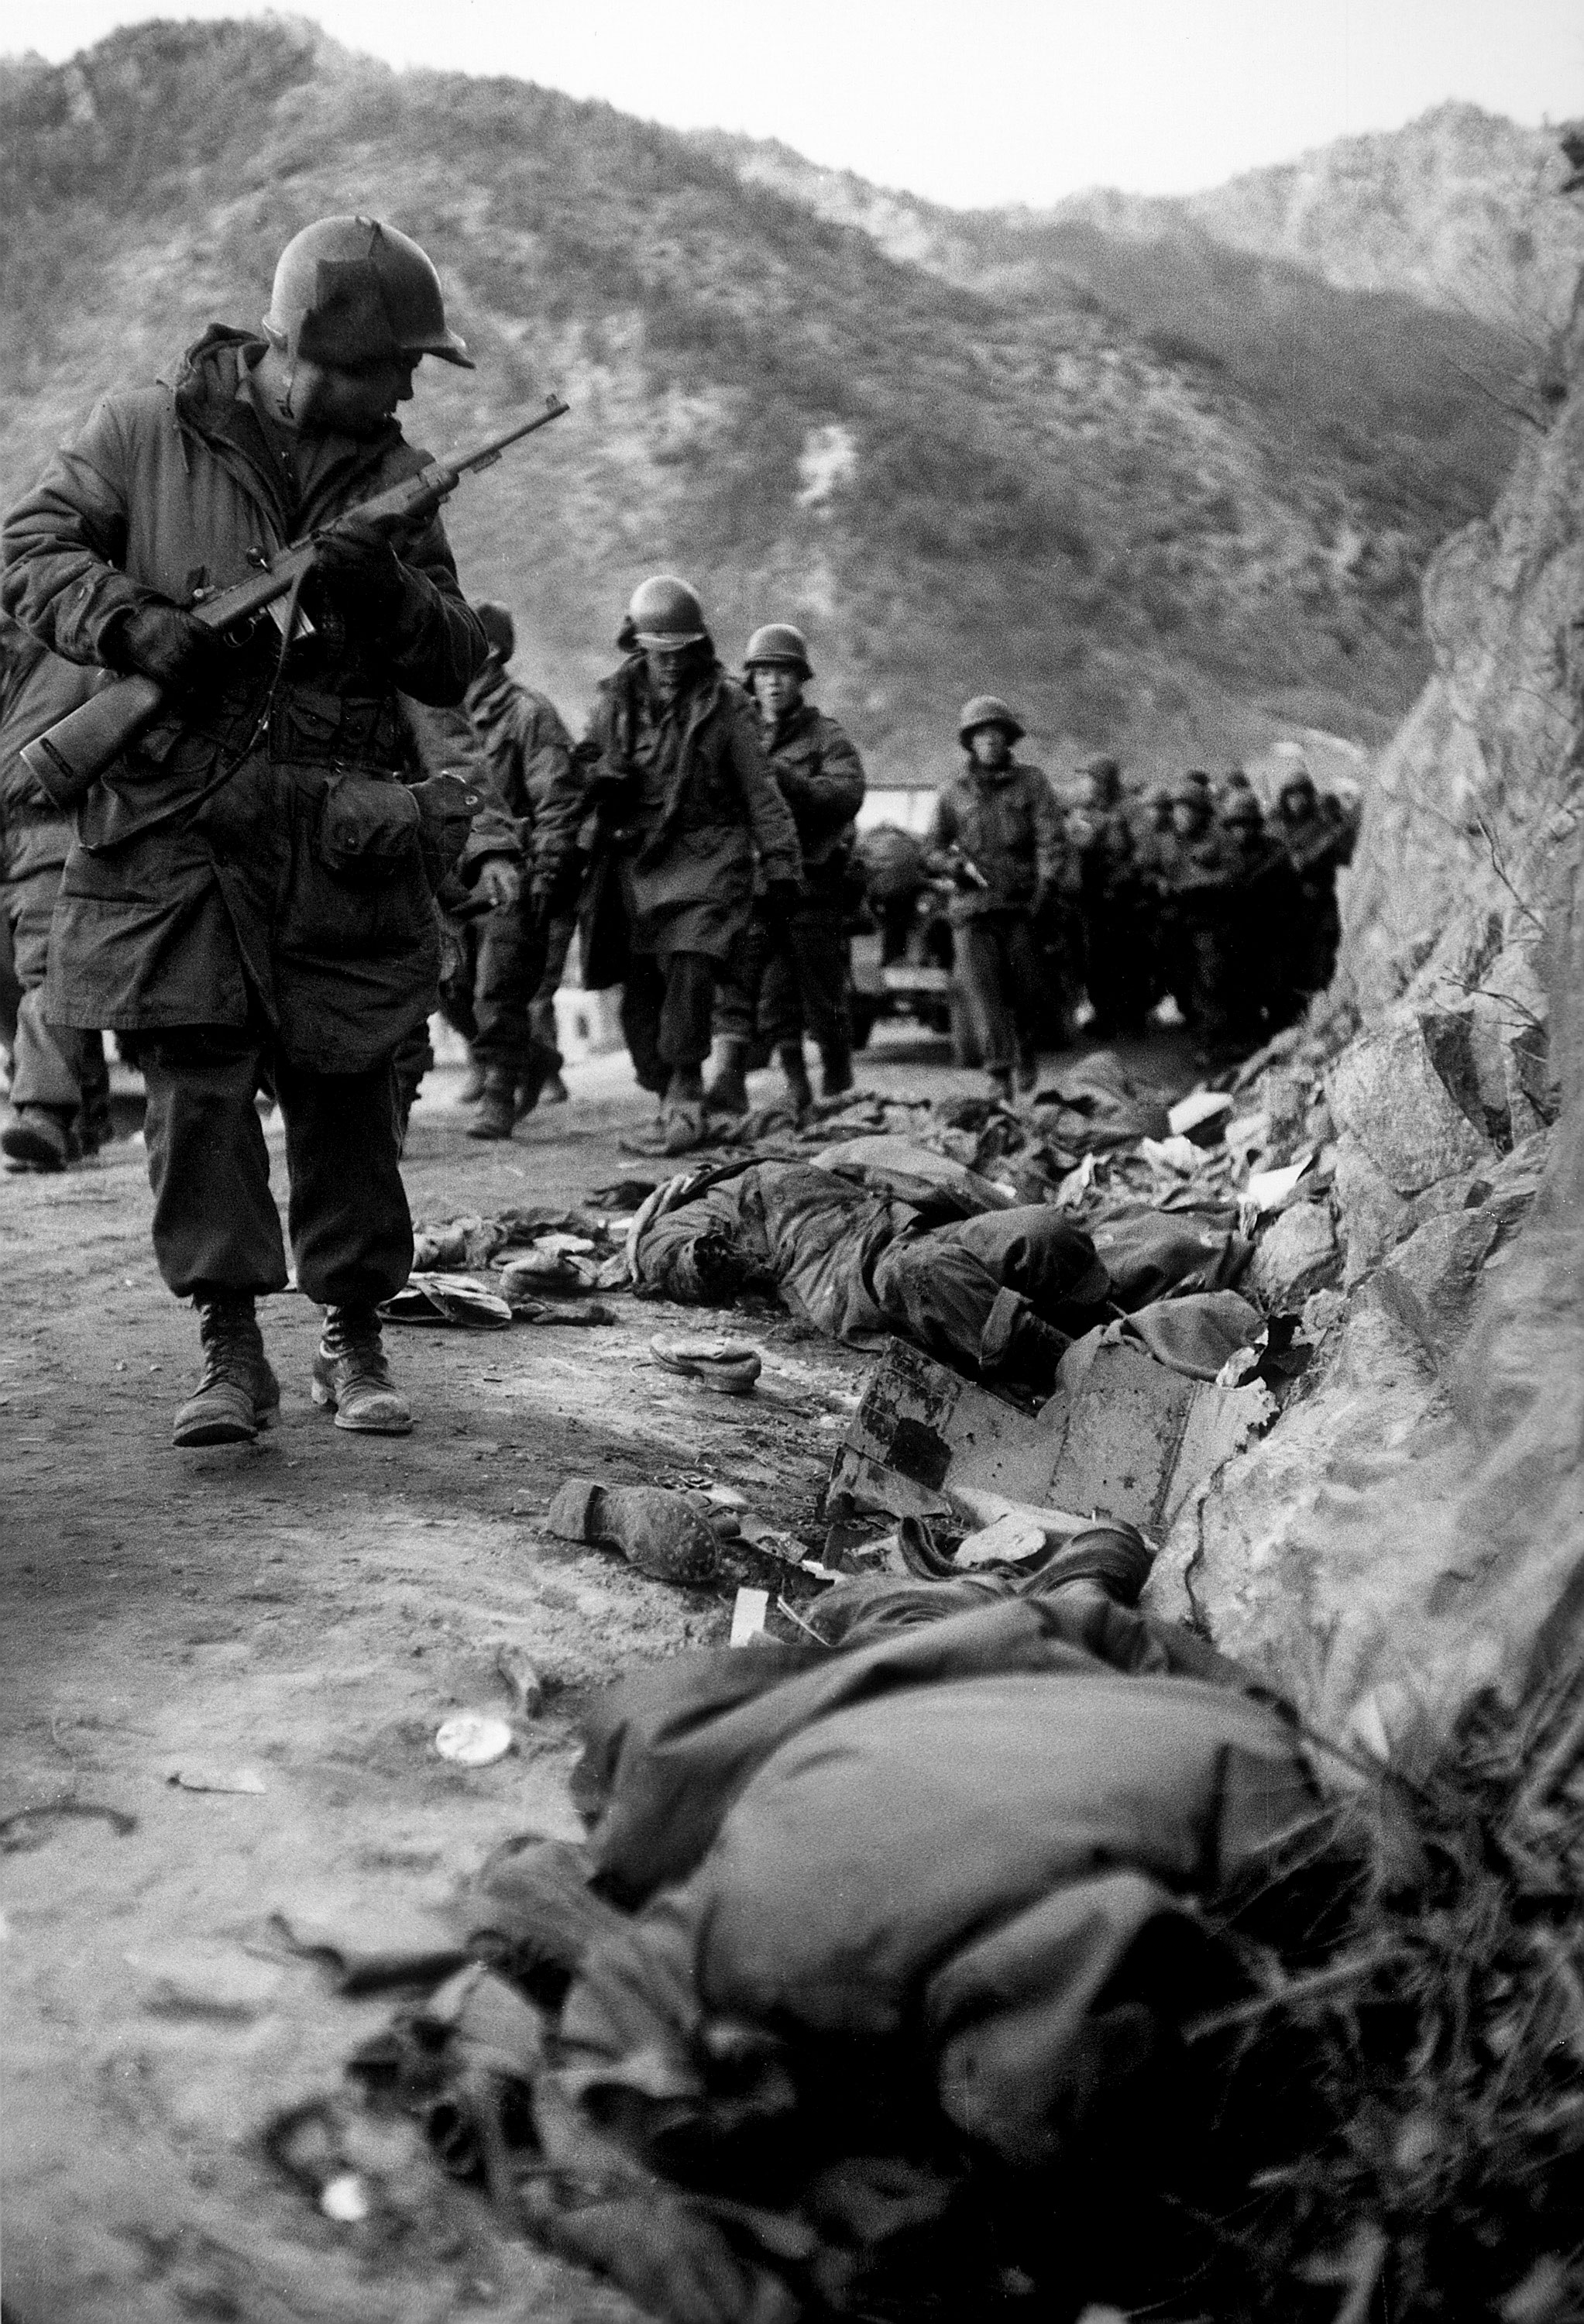 American Marines pass bodies of fallen comrades during the retreat from the Chosin Reservoir, December 1950.